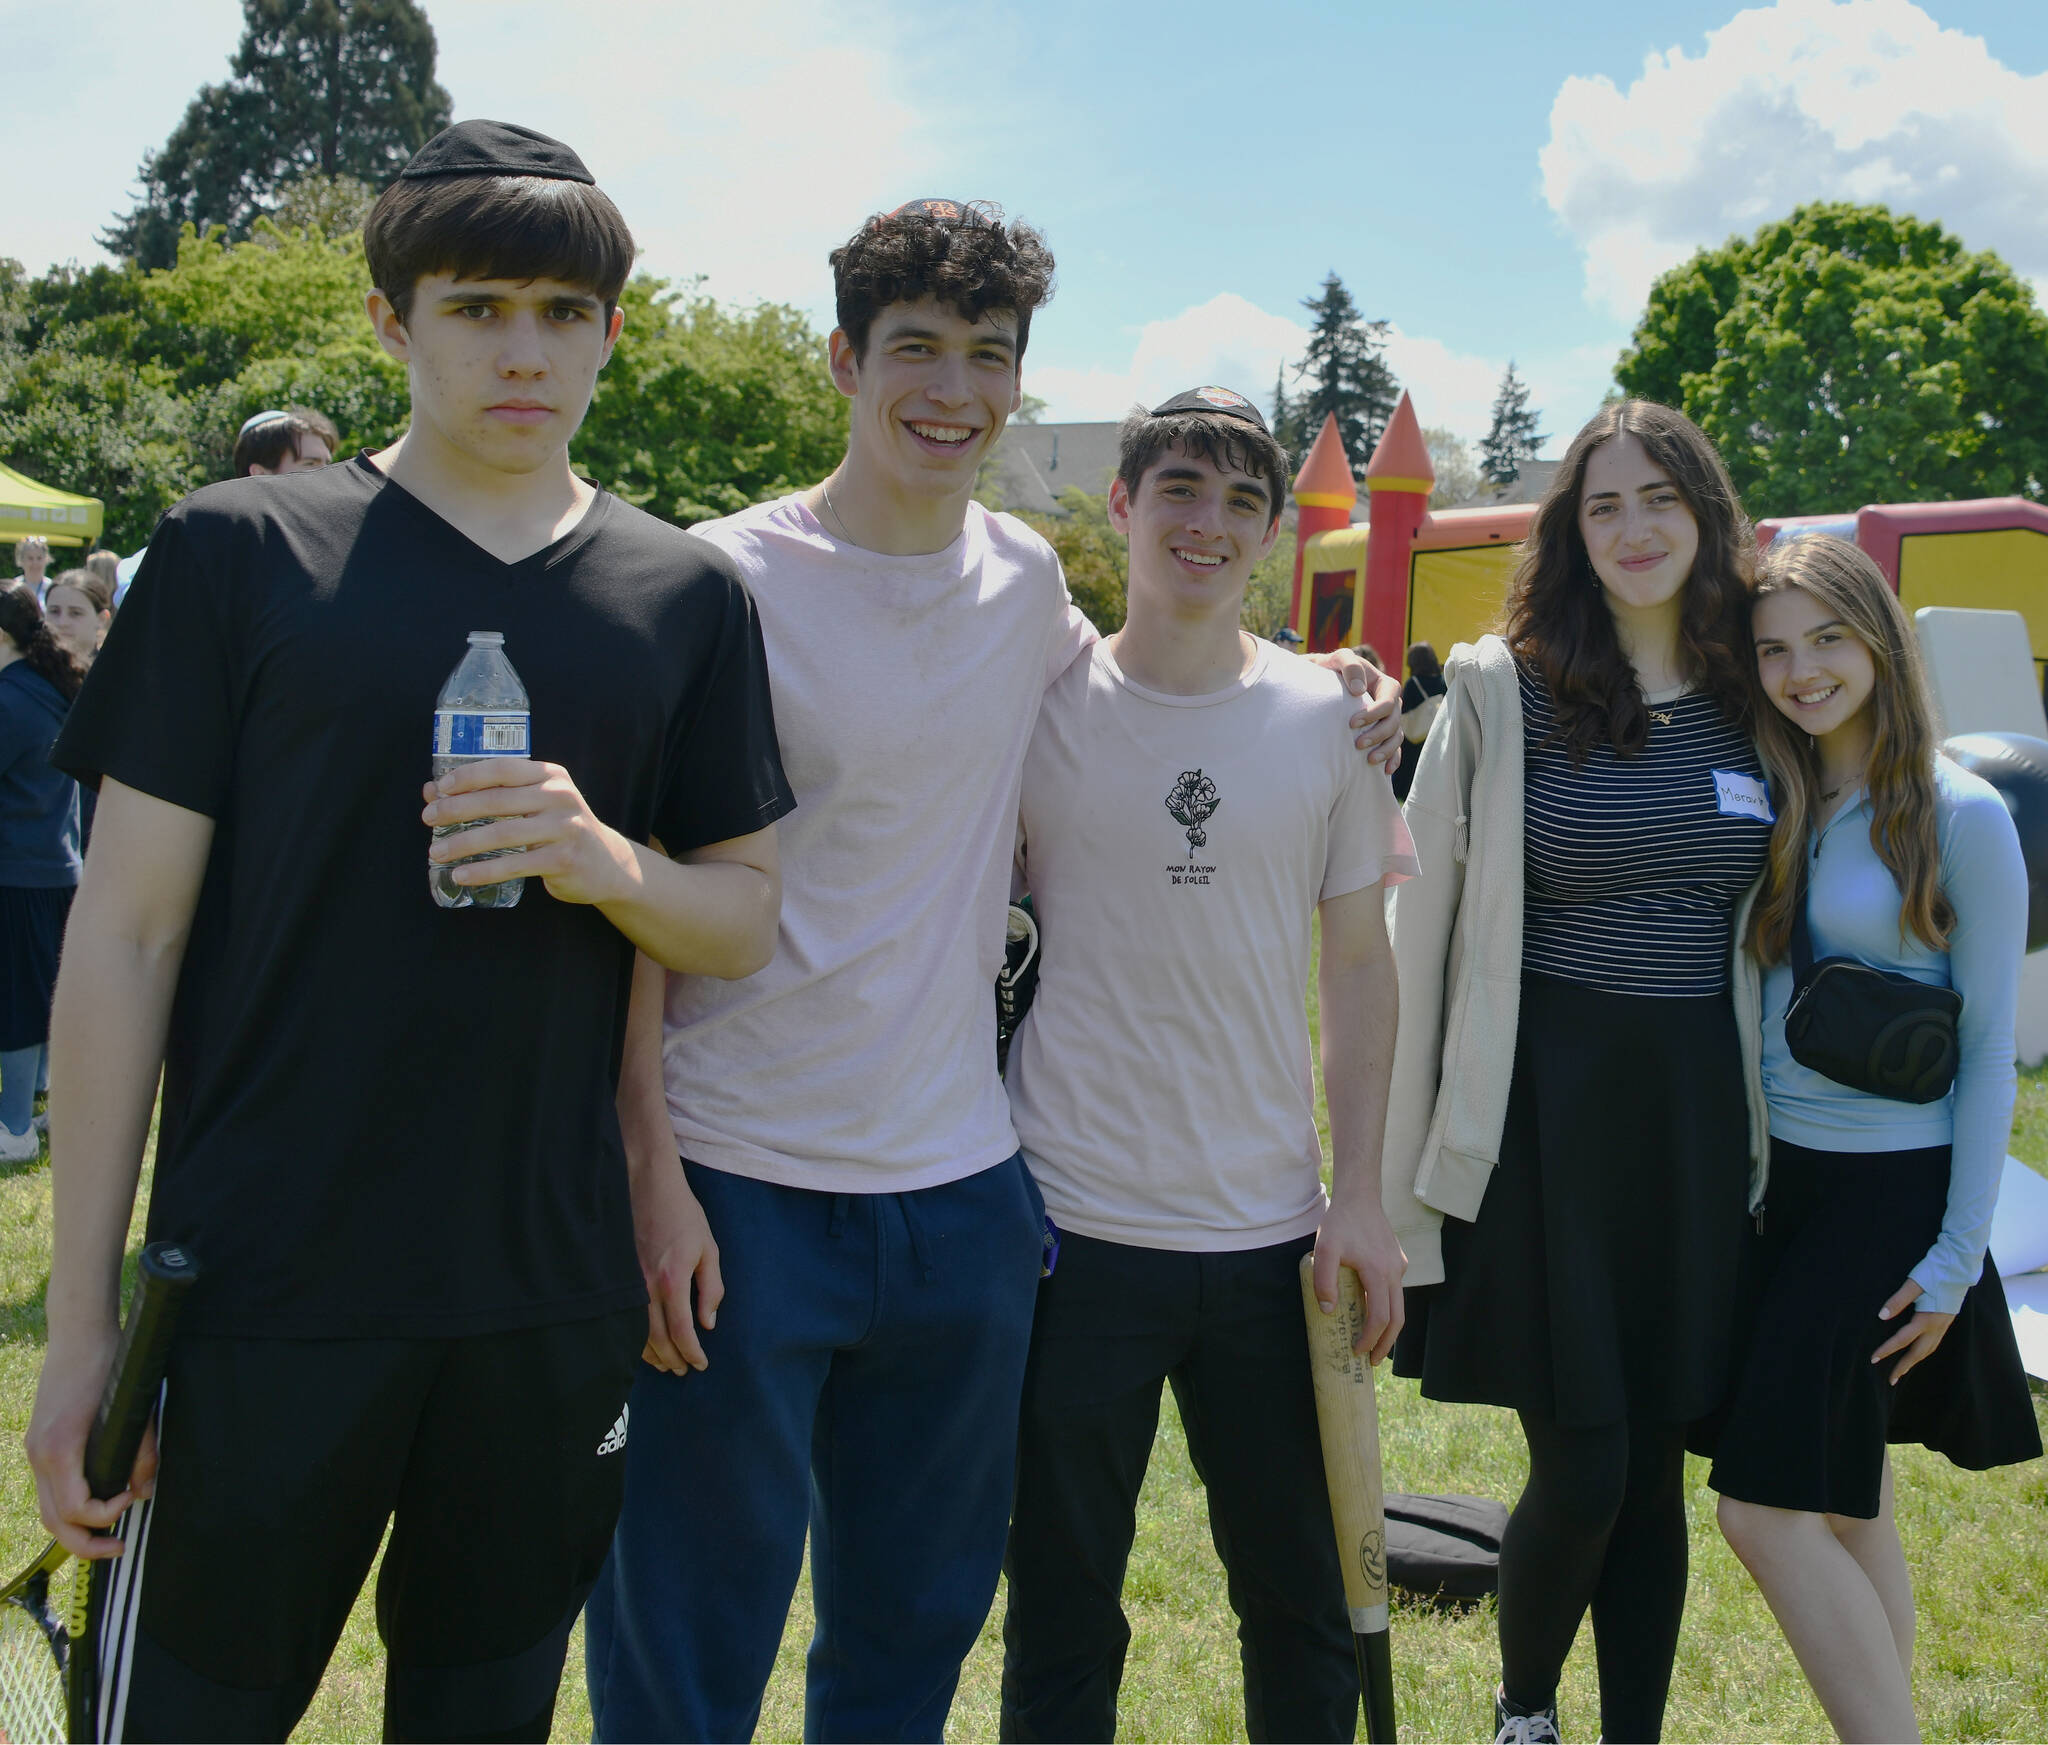 Northwest Yeshiva High School (NYHS) students, from left to right, Steven Rolan, Daniel Negrin, Yehonatan Rothstein, Merav Frank and Emma Almo participate in an all-local Jewish day school Lag B’Omer celebration on May 9 at Aubrey Davis Park on Mercer Island. Lag B’Omer is a Jewish holiday that occurs between Passover and Shavuot, and it is customary to listen to and play music, barbecue, play sports and have fun. For the first time in Seattle history, six Jewish day schools in the greater Seattle area celebrated together. The schools were: NYHS from Mercer Island (9-12), Jewish Day School from Bellevue (K-8) and Seattle’s MMSC Day School (K-8), Seattle Hebrew Academy (K-8), Seattle Jewish Community School (K-8) and Torah Day School/Derech Emunah (K-12). Andy Nystrom/ staff photo